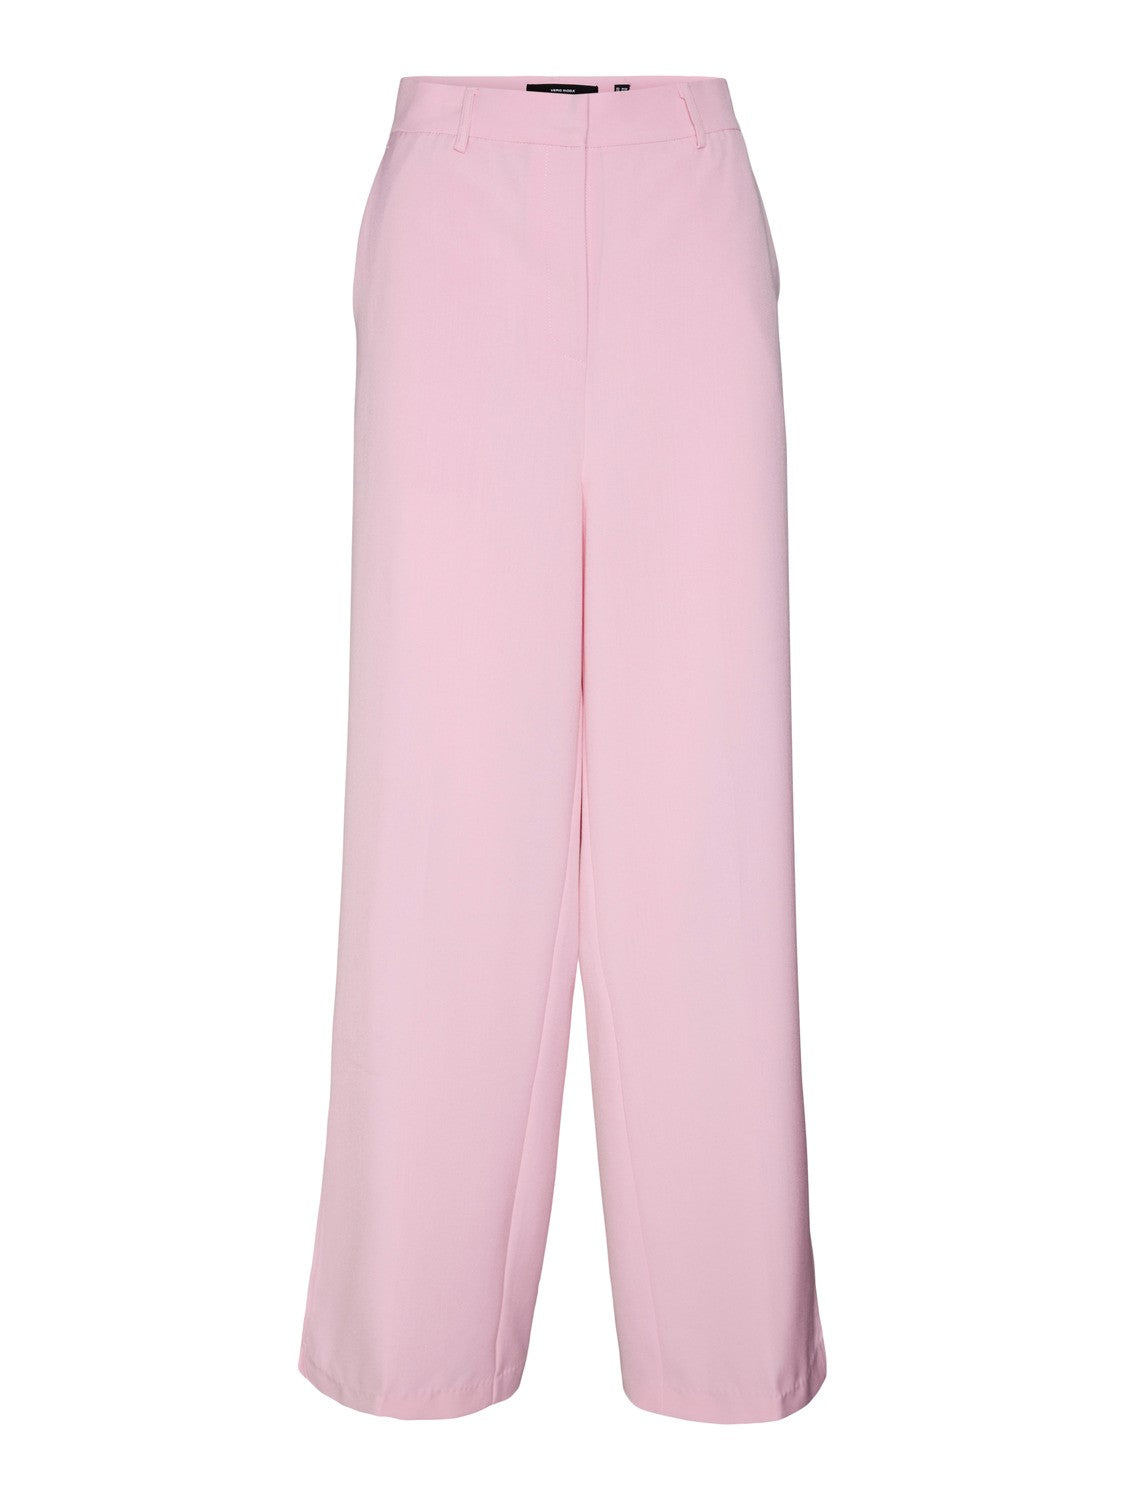 Troiantaia Pink Side Slit Trousers